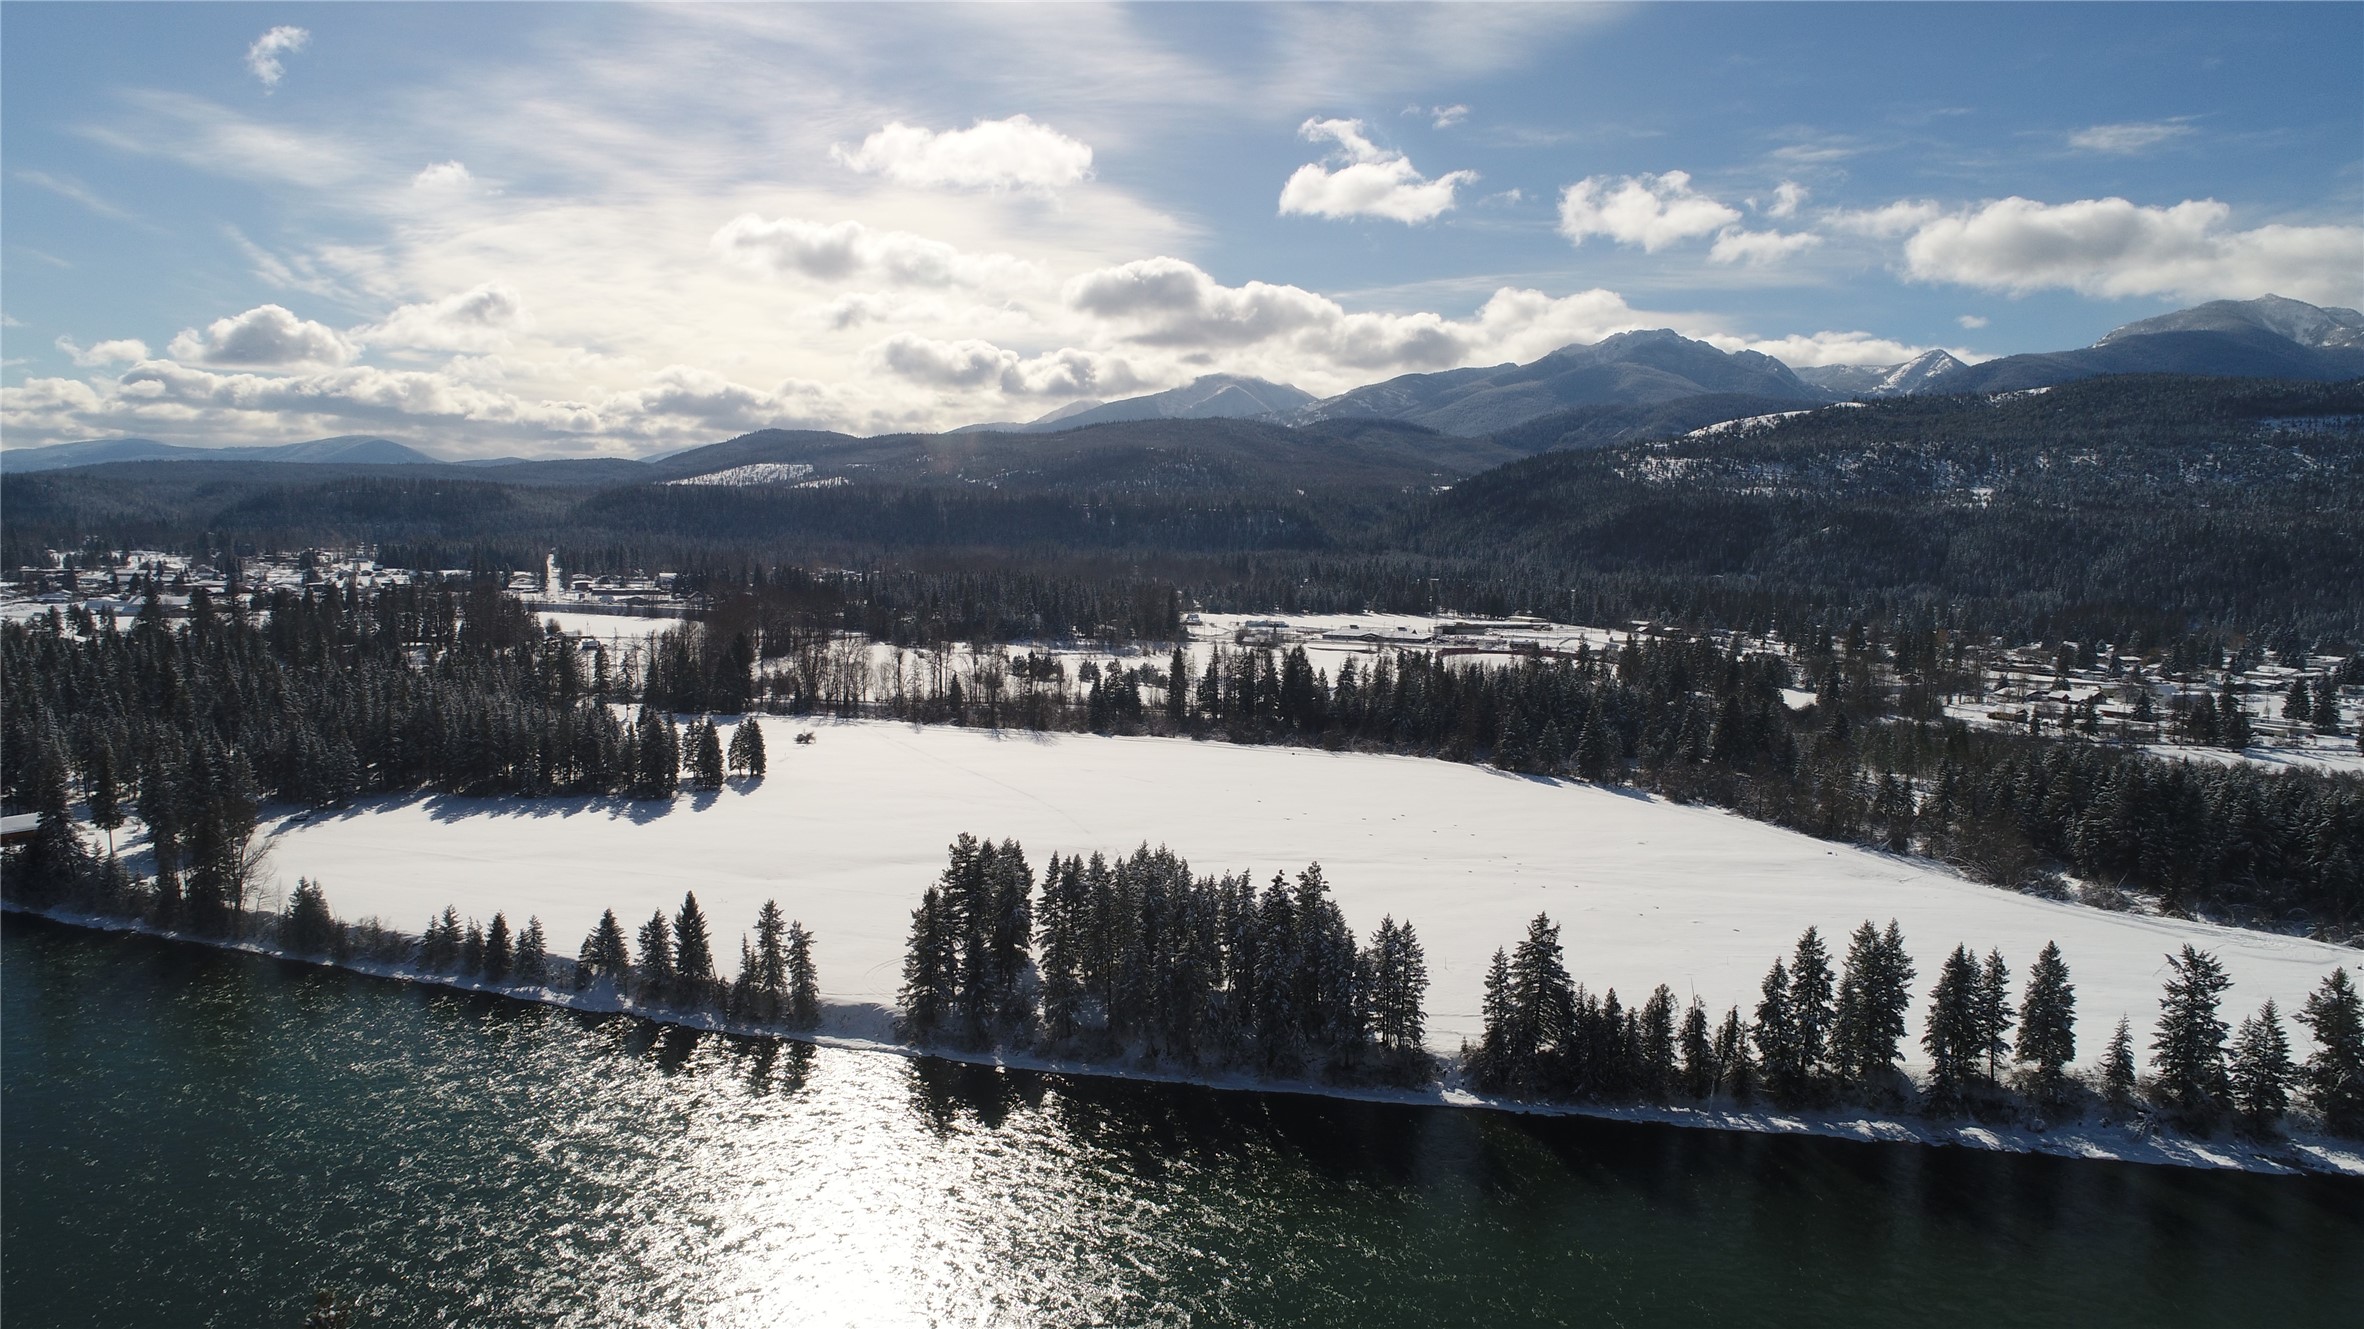 345 feet of Kootenai River frontage! This 9.57 acres is level with some trees and has a 60 gpm well, septic approval and electricity available. With Cabinet Mountain views it is located just one mile from Libby. This property is ready to build and/or farmable. Must see to appreciate! Seller can install electrical service and septic system for additional cost. Listing agent is related to an employee of Seller. Call Chris Faulkner at 406-291-3269 or 406-293-2146 or your real estate professional.